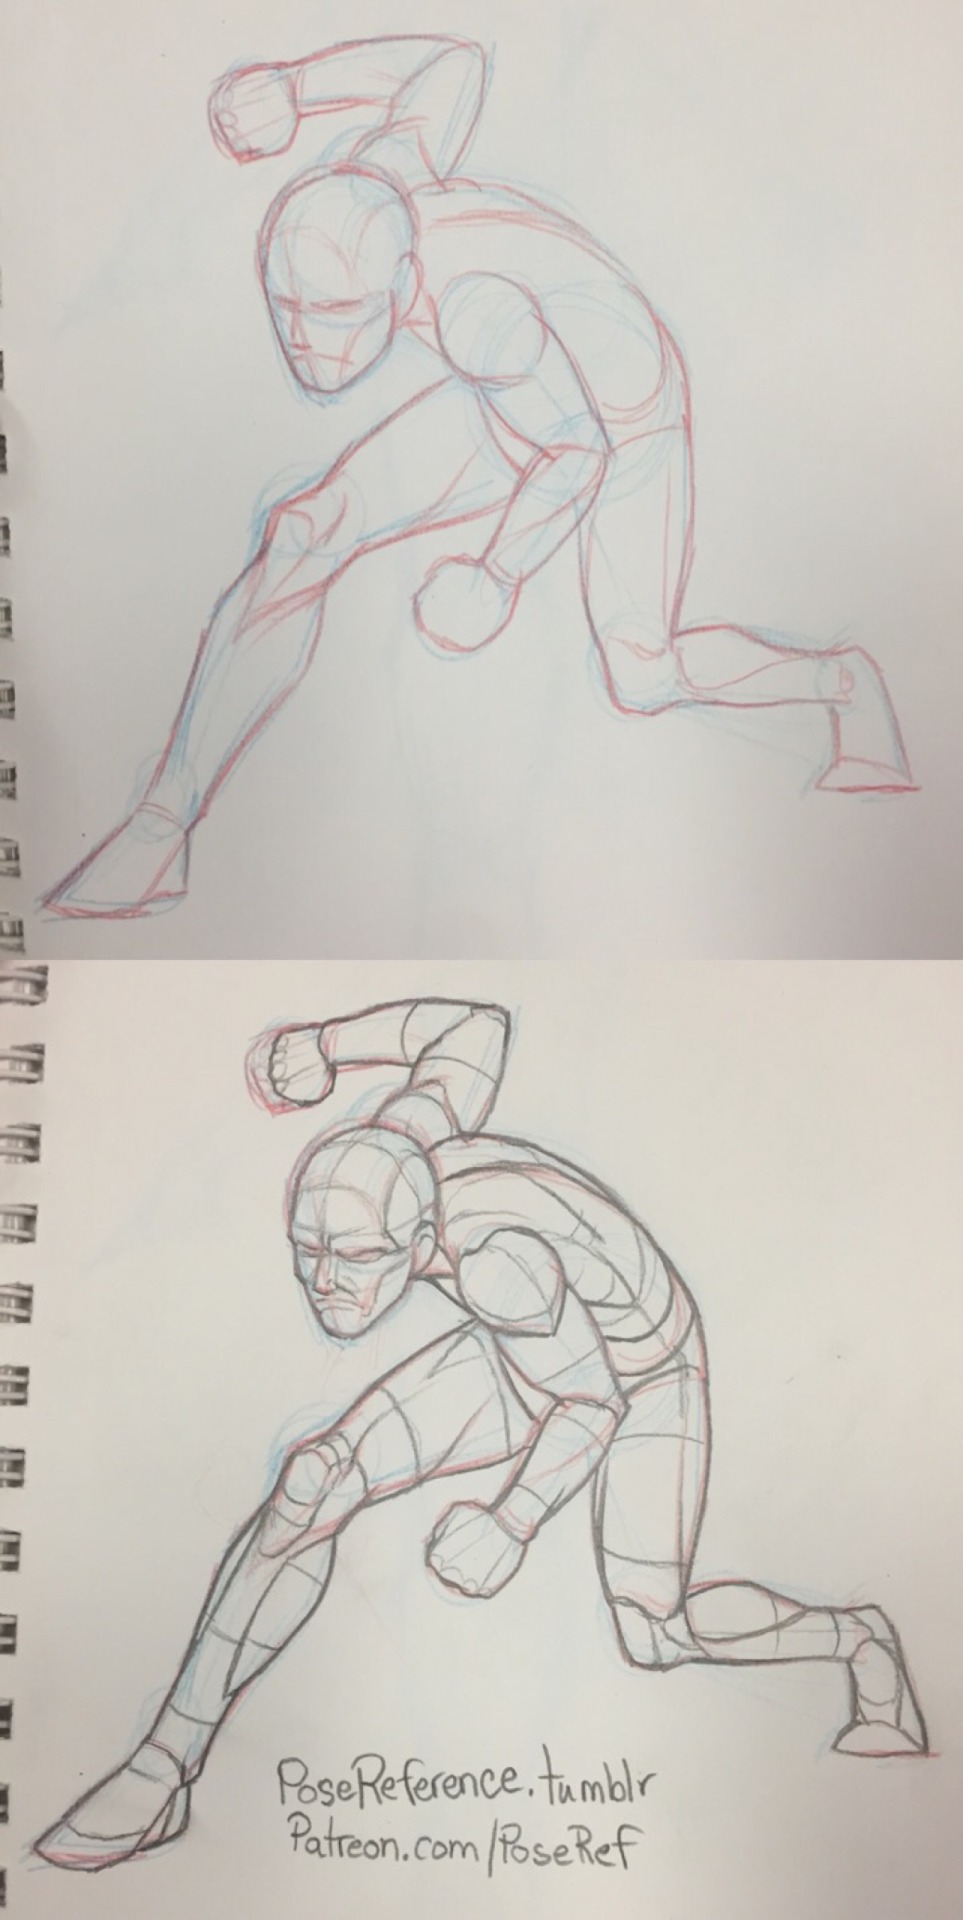 HOW TO DRAW Manga Men Muscle man boy action pose dessin anime Book Japan  New $35.90 - PicClick